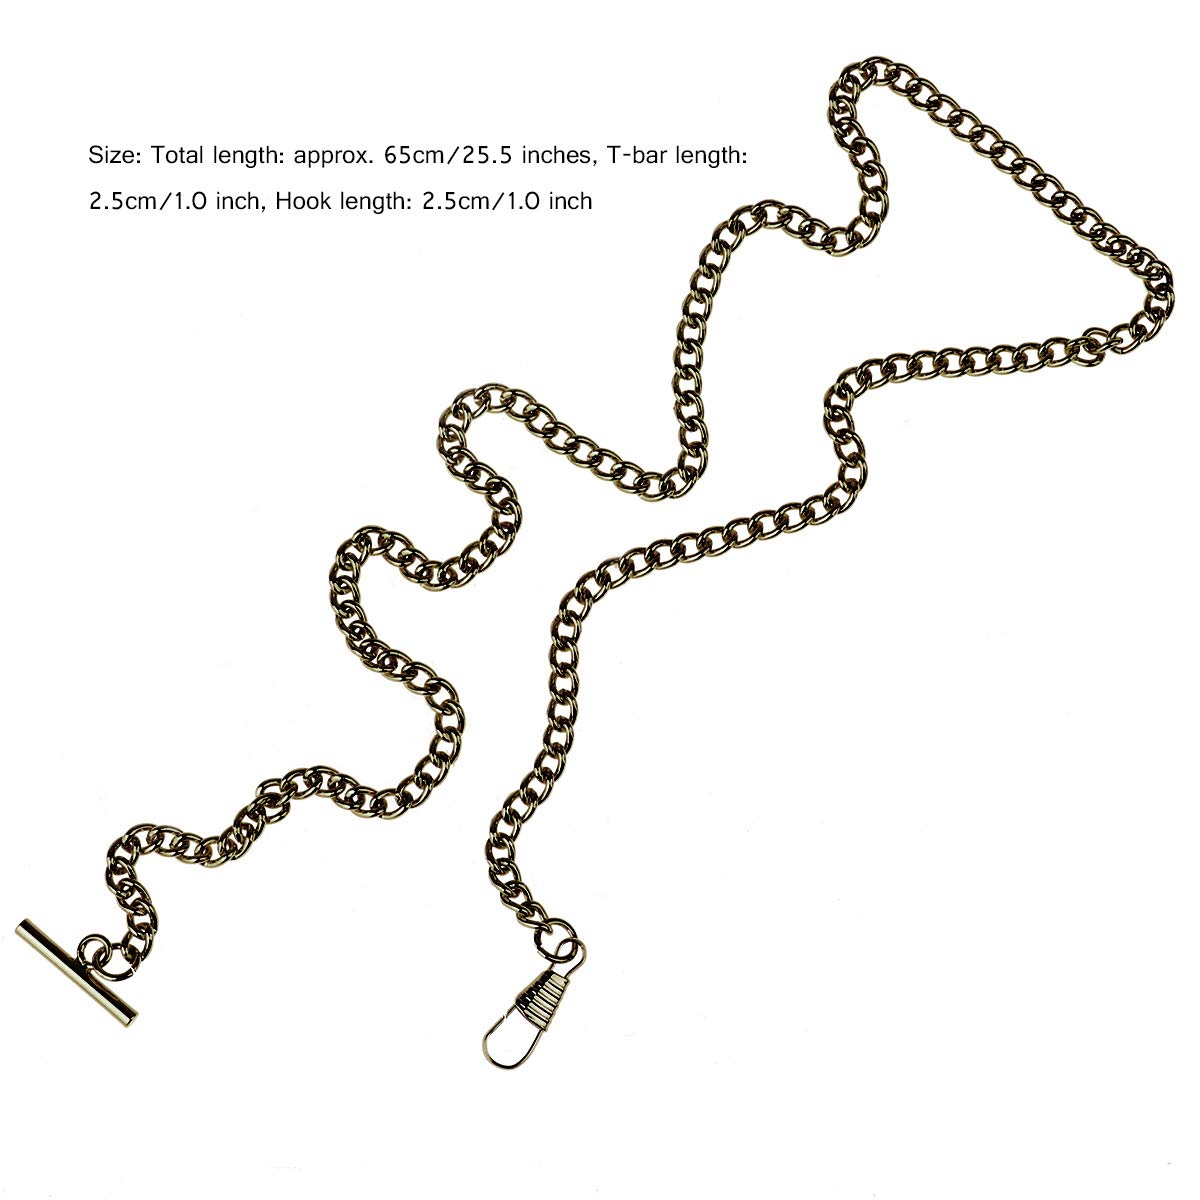 YiZYiF Mens Pocket Watch Chain Vintage Chrome Plated Albert T-Bar Vest Waistcoat Pocket Chain Link with Lobster Clasps